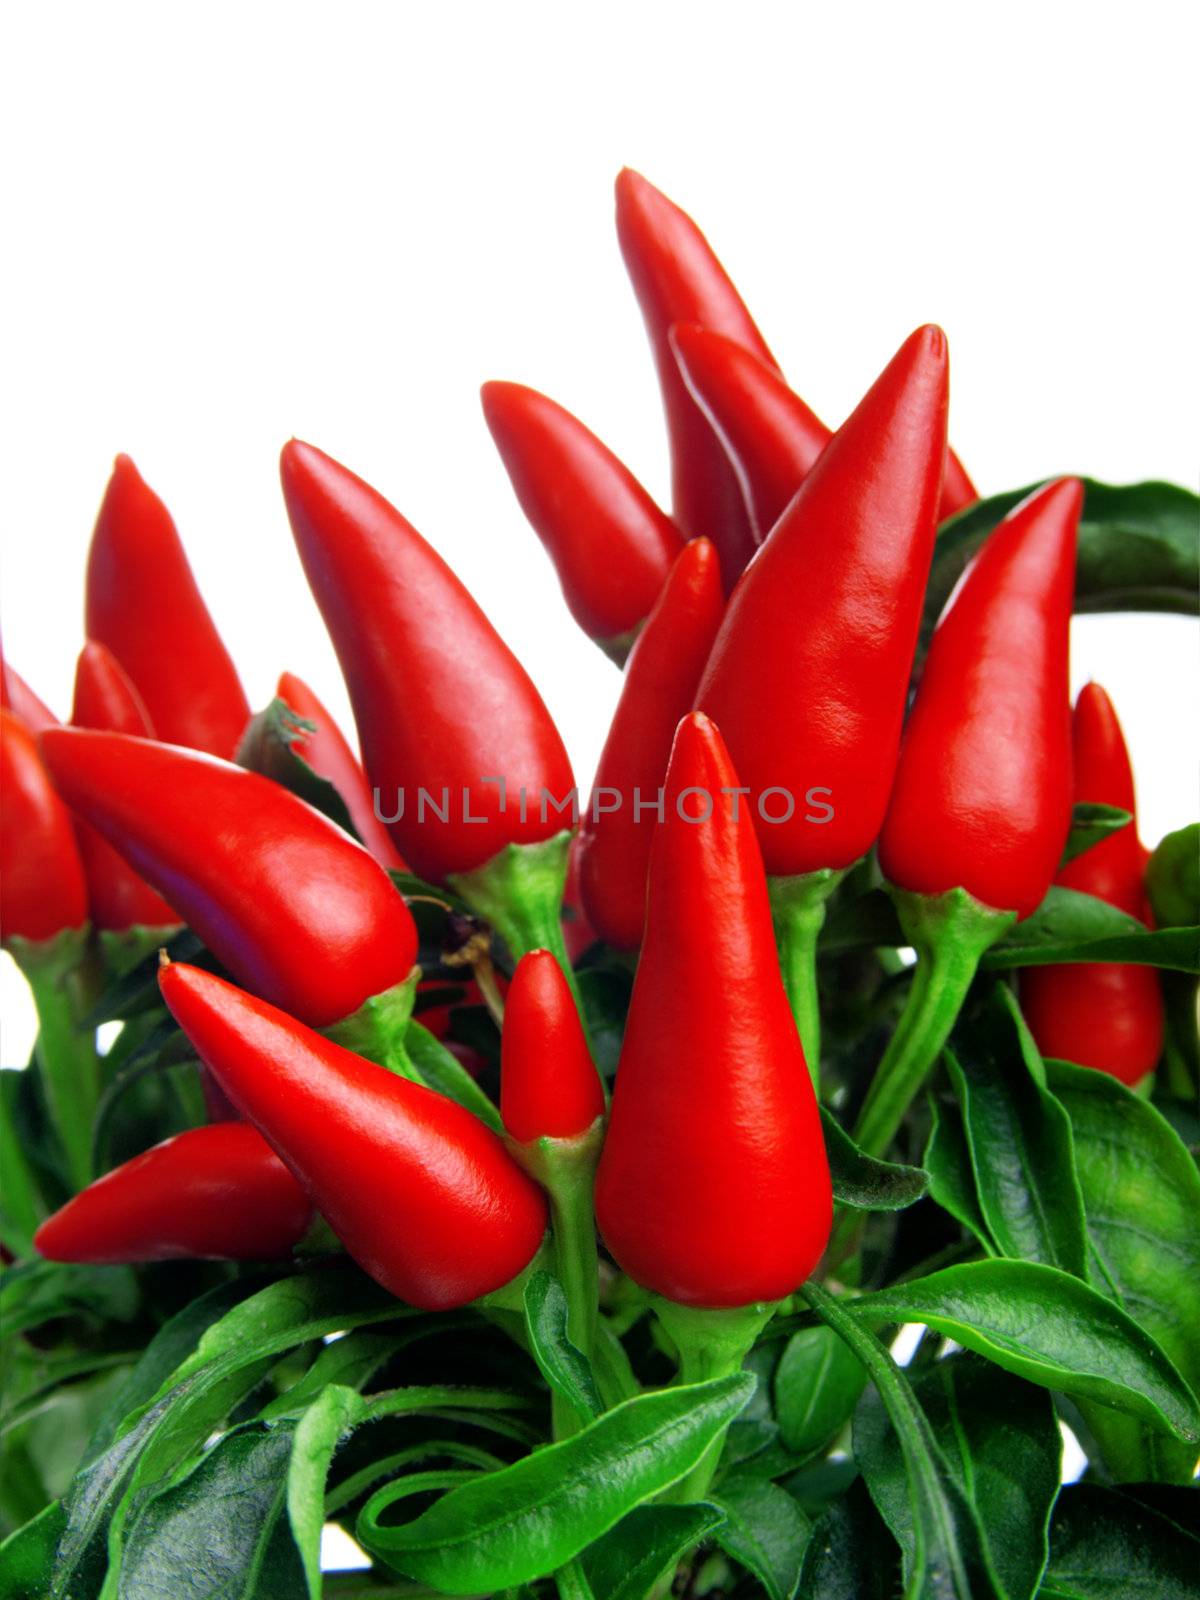 plant of red hot chili pepper, on white background